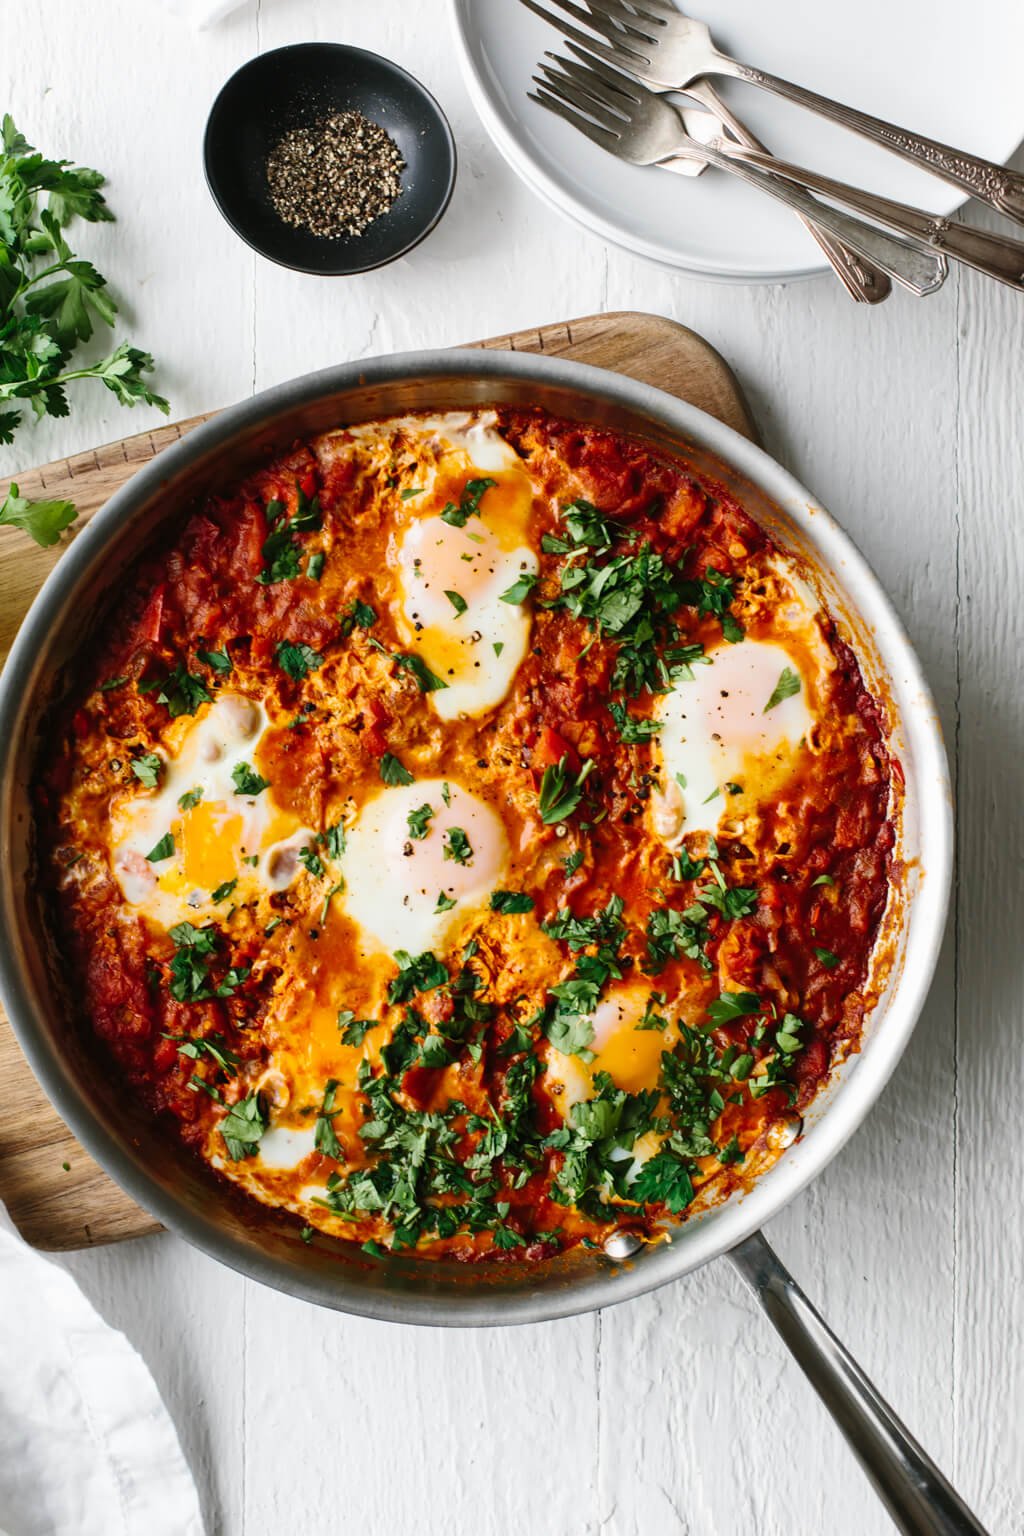 Shakshuka is an easy, healthy breakfast recipe in Israel and other parts of the Middle East and North Africa. It's a simple combination of simmering tomatoes, onions, garlic, spices and gently poached eggs.